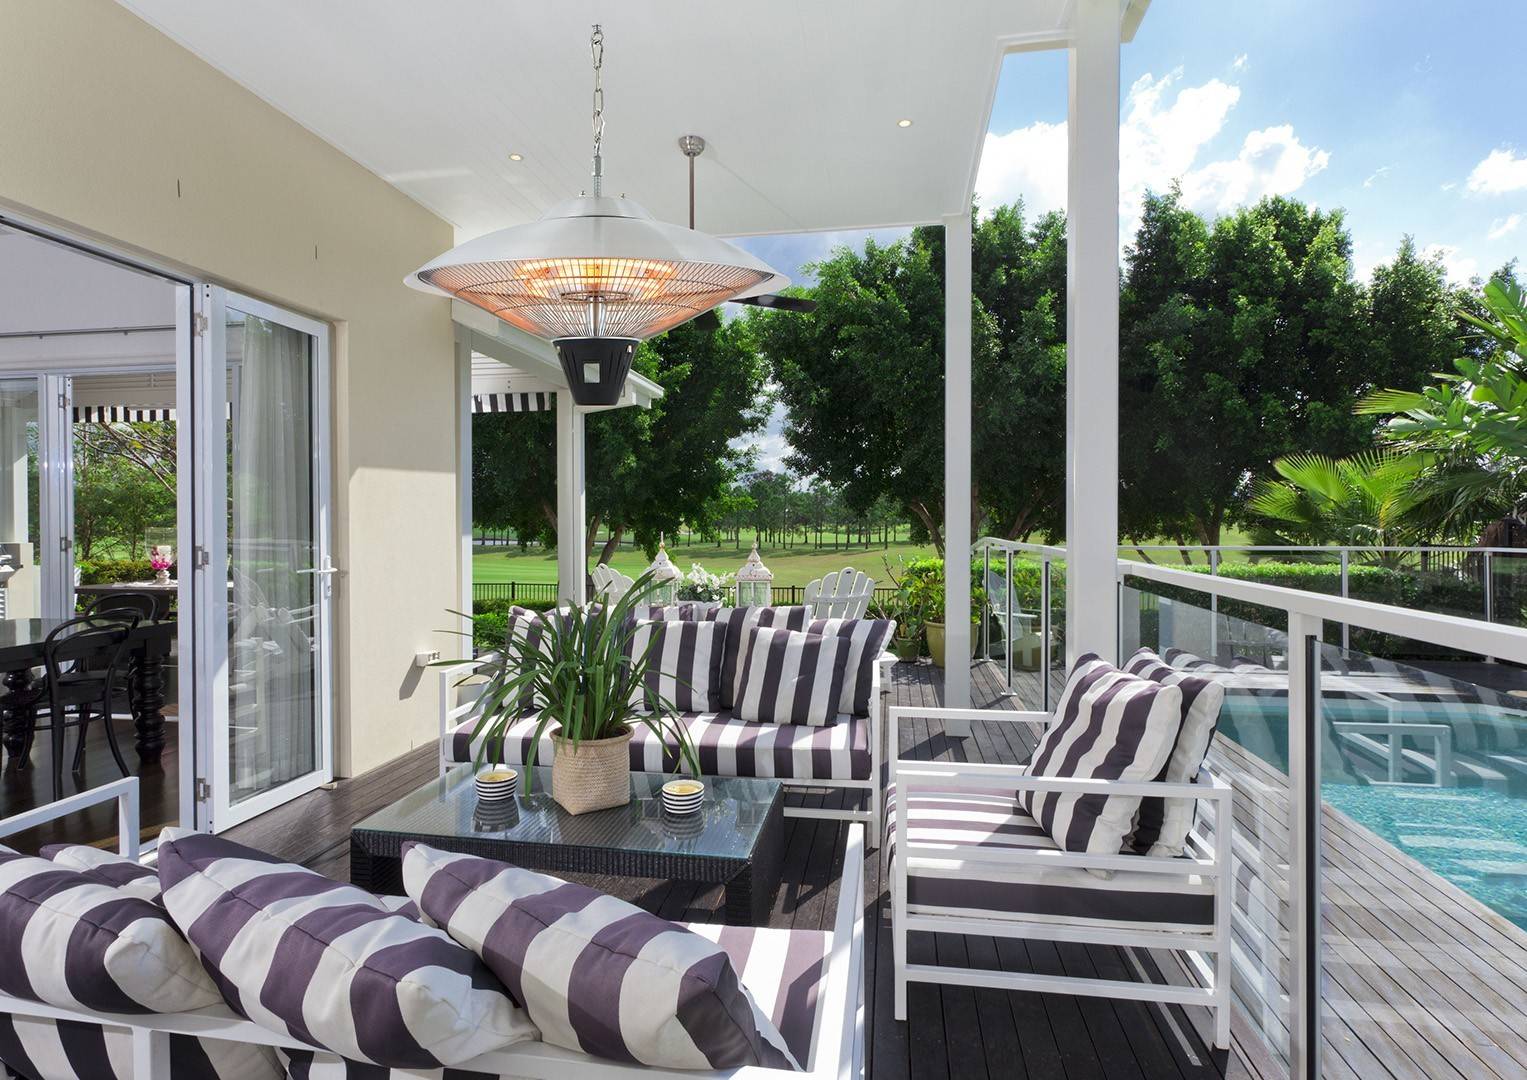 Invest in an outdoor entertainment space to up your home’s value!